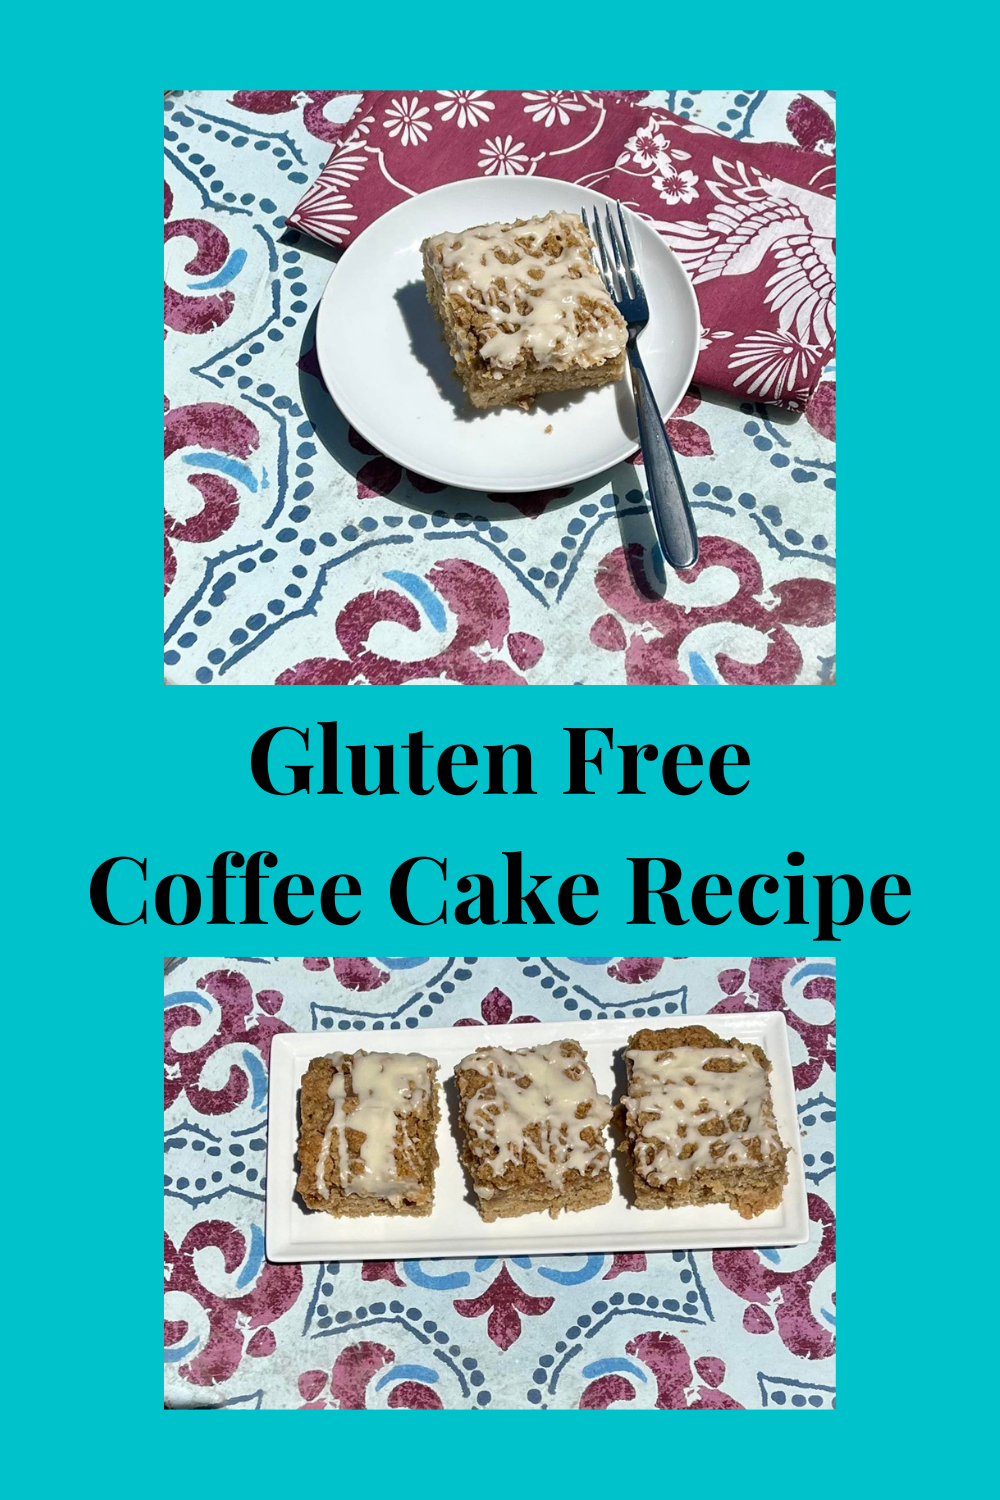 Your family will love it when you bake this gluten free coffee cake recipe. It's tender and moist with plenty of streussel!